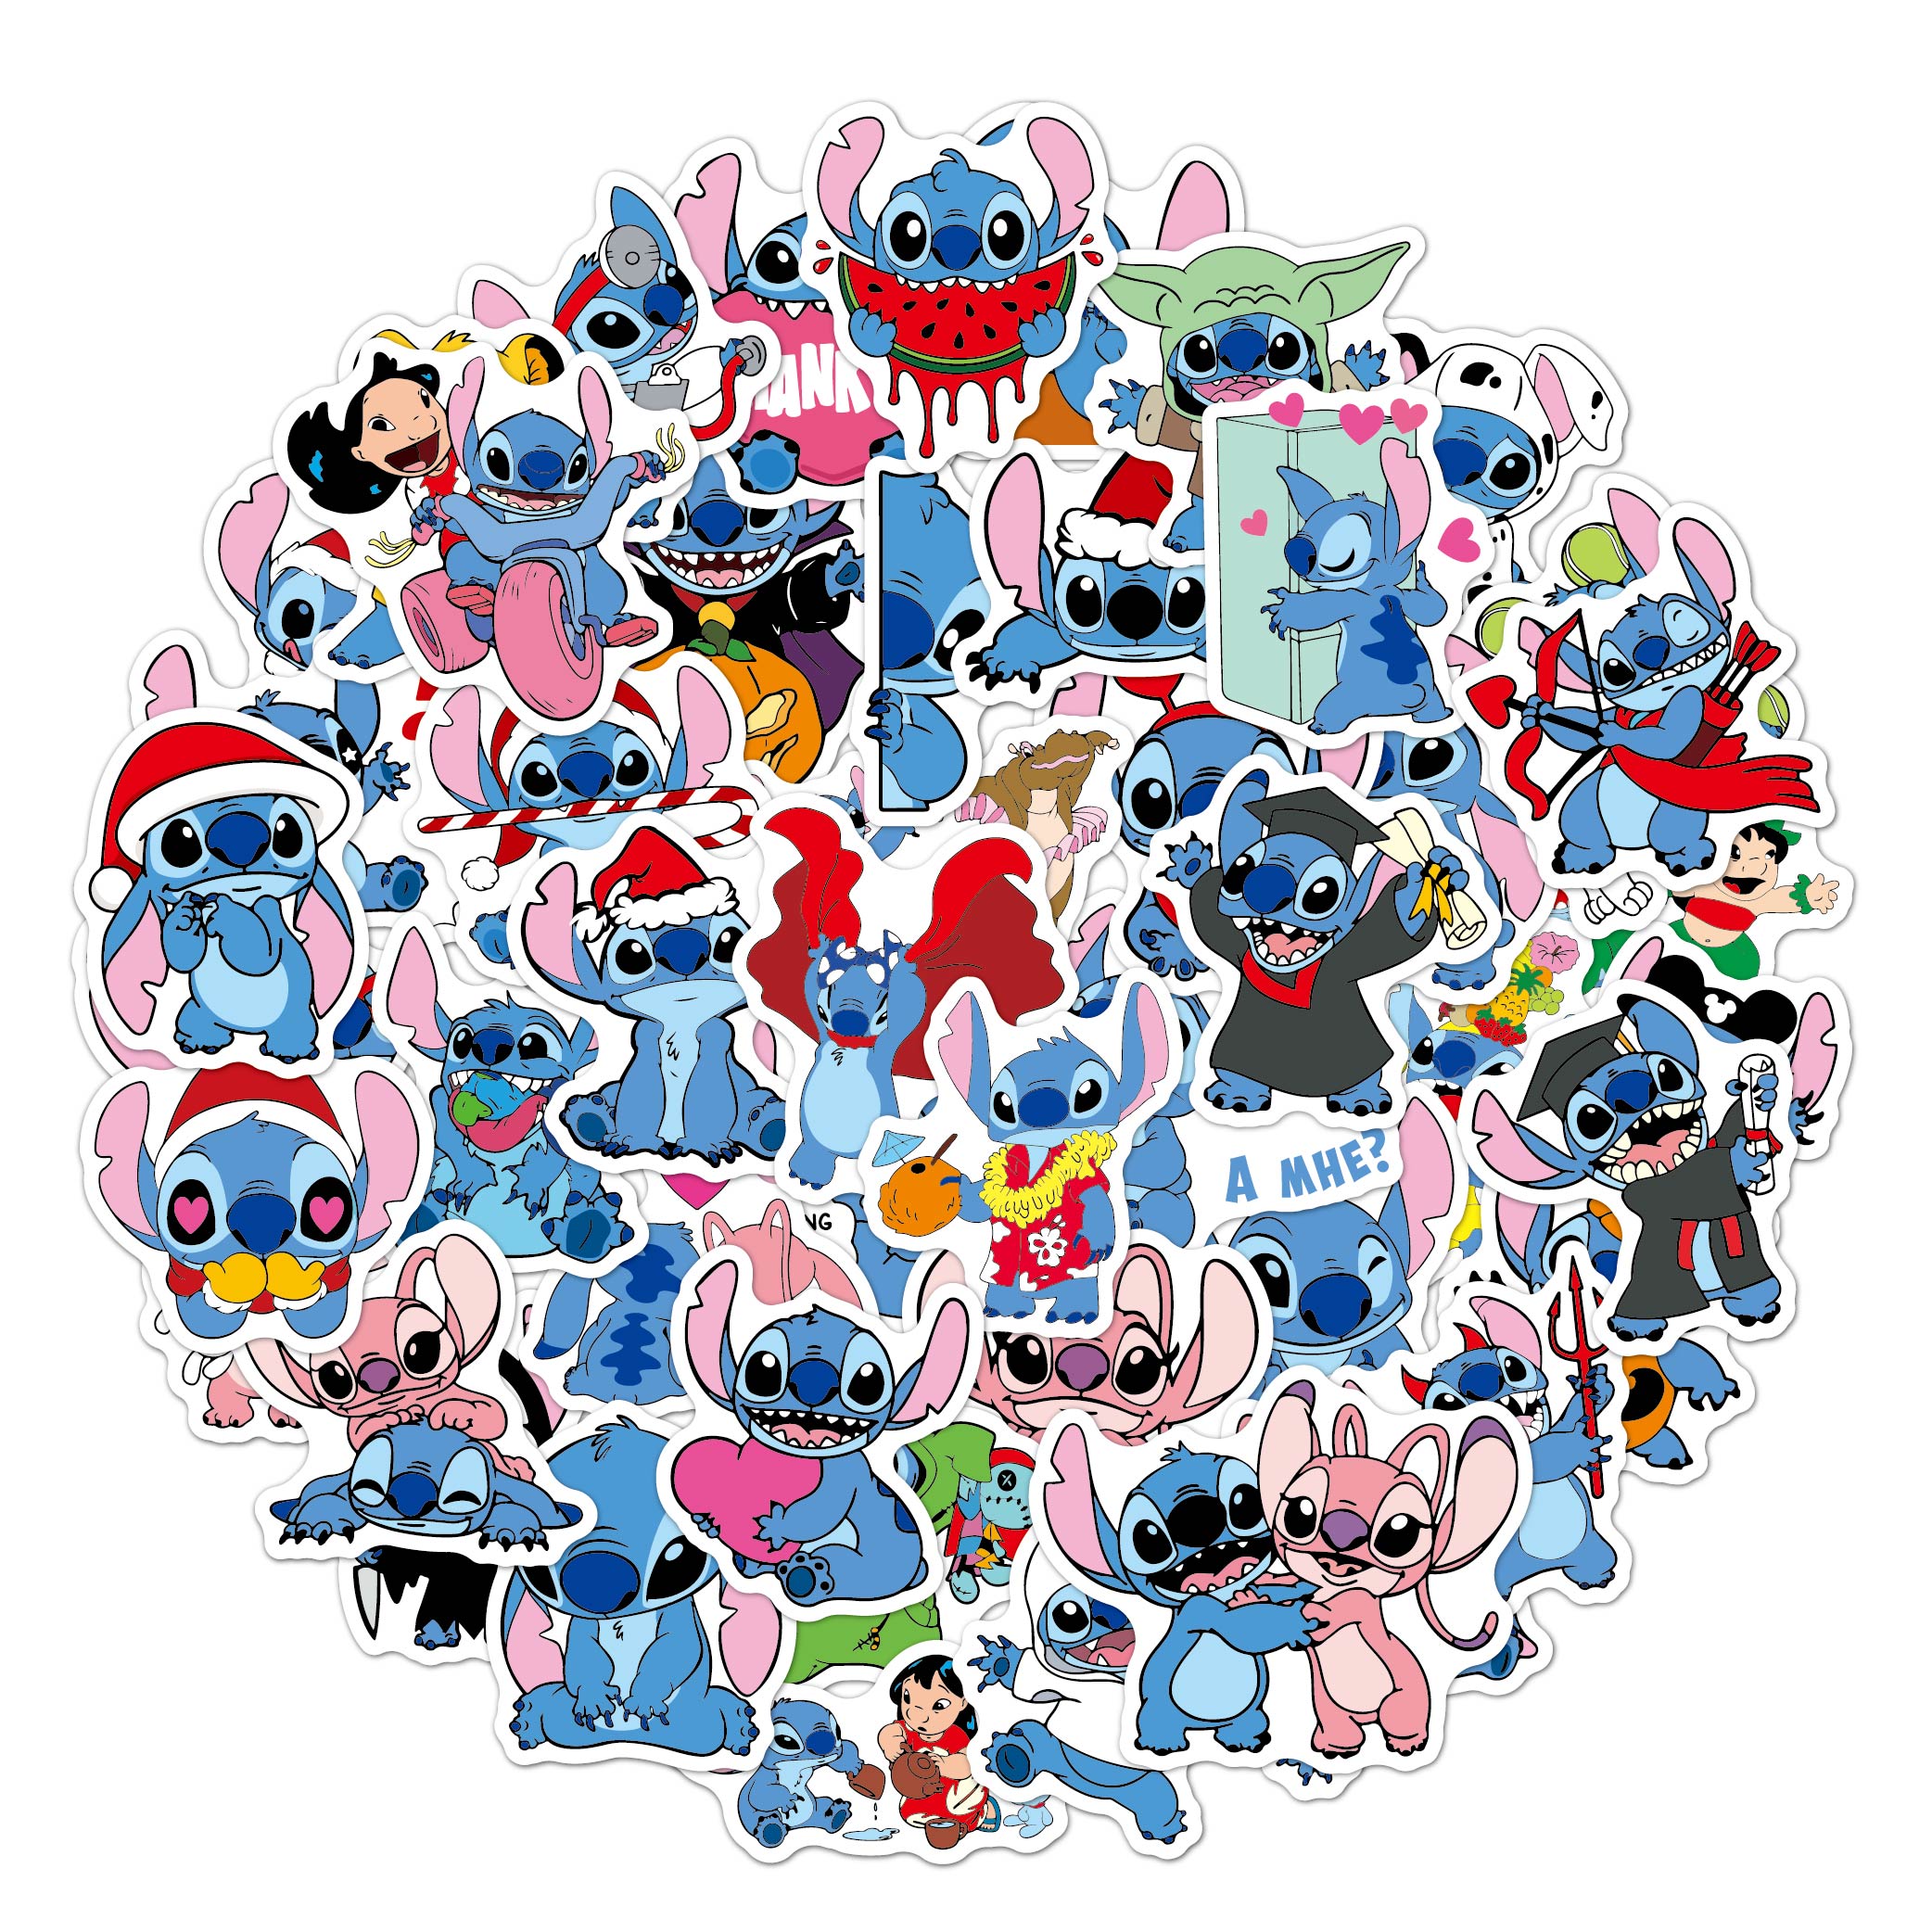 50Pcs Stitch Stickers, Cute Lilo & Stitch Vinyl Sticker for Water Bottle,  Laptop,Bumper,Helmet,Skaterboard, Funny Stitch Durable Stickers and Decals